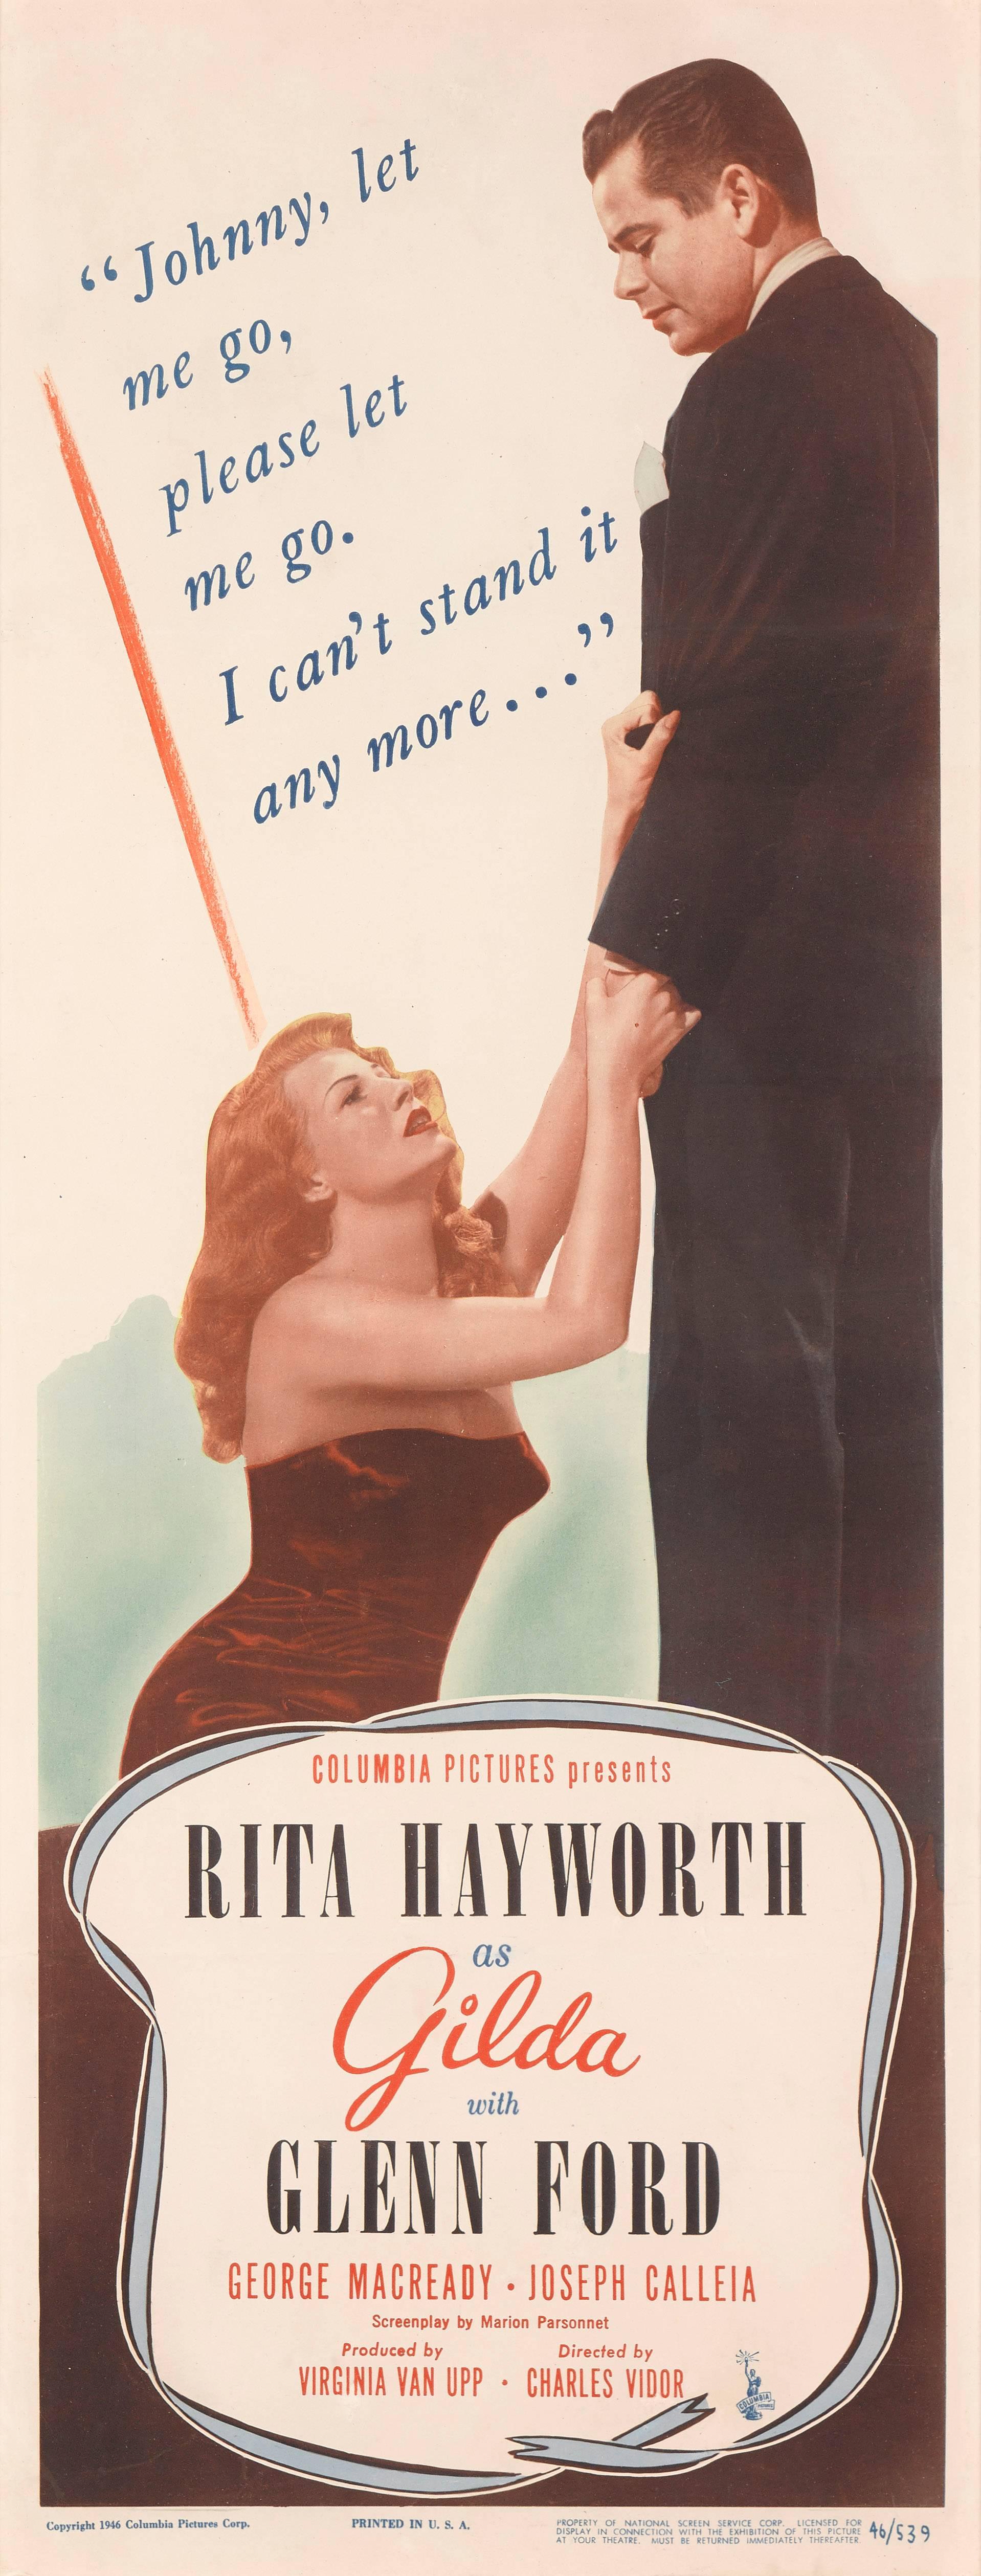 Original US movie poster for the classic 1946 drama starring Rita Hayworth, Glenn Ford and directed by Charles Vidor.
    